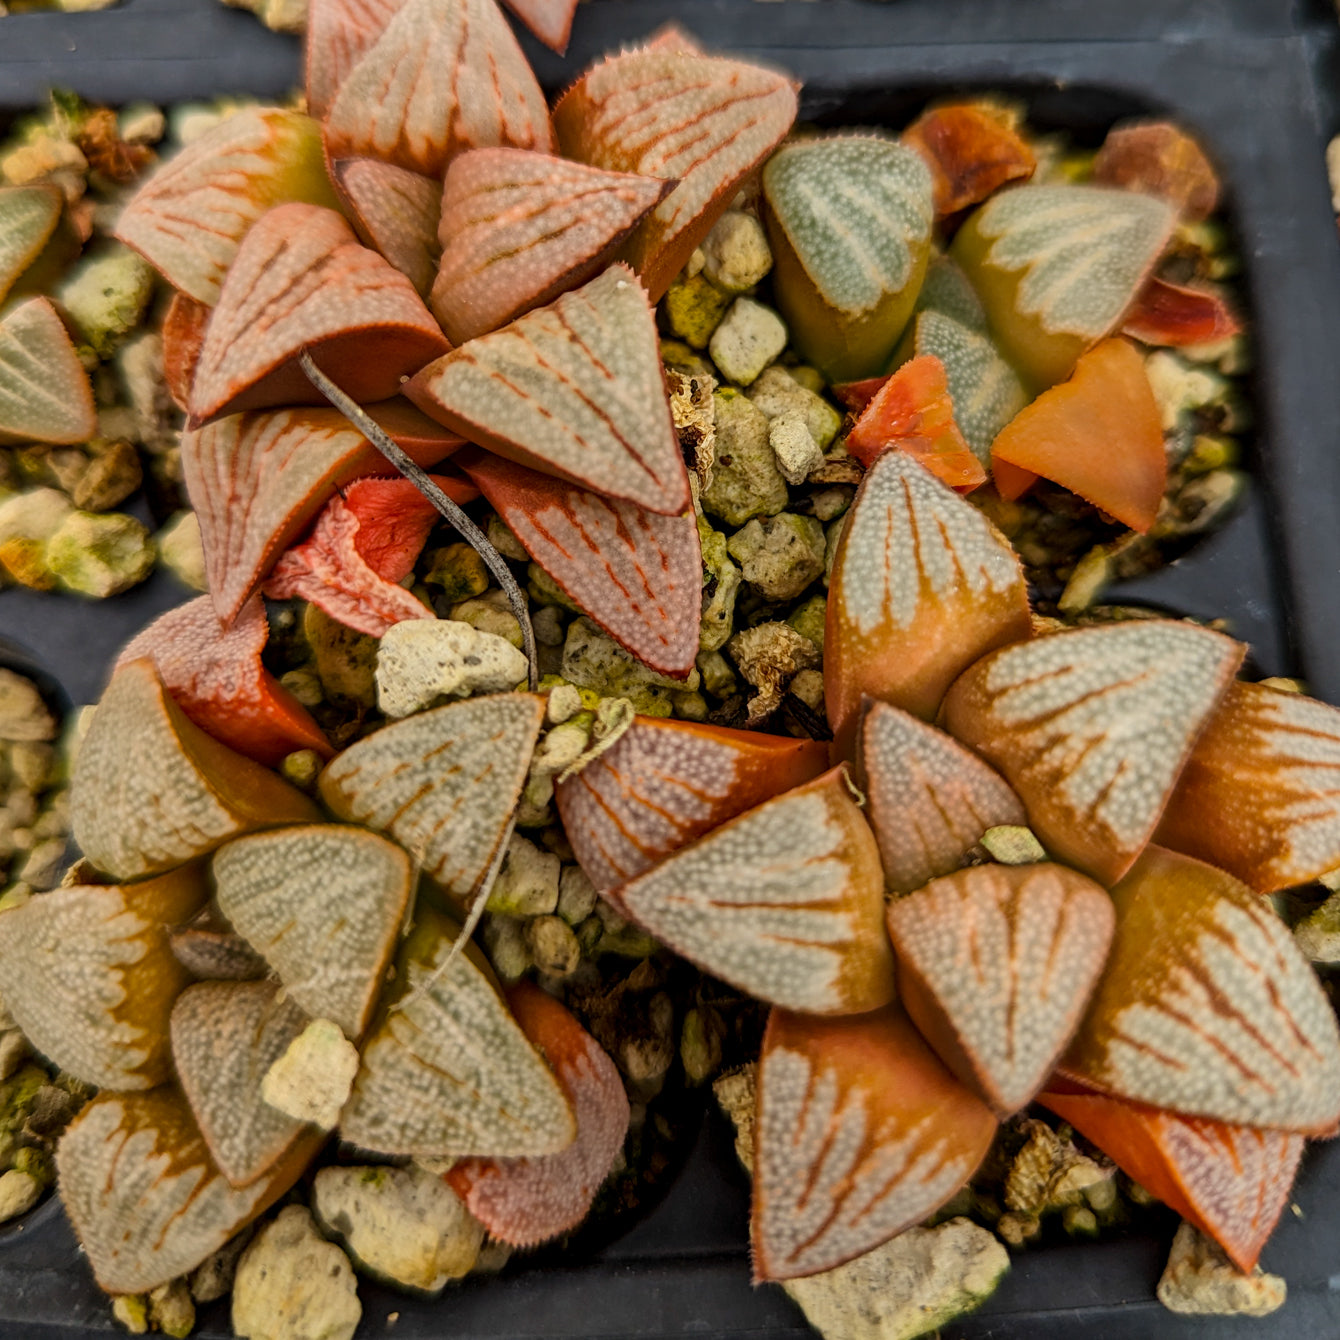 Haworthia Lovers' Special: 7 plants for $55!